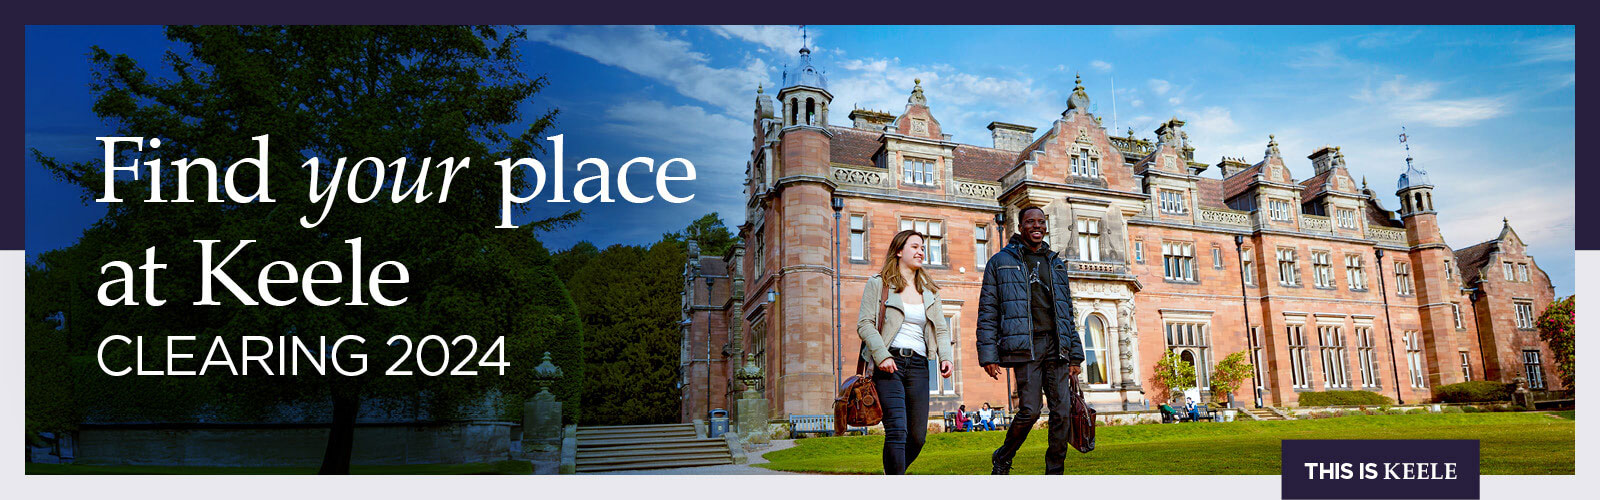 Find your place at Keele